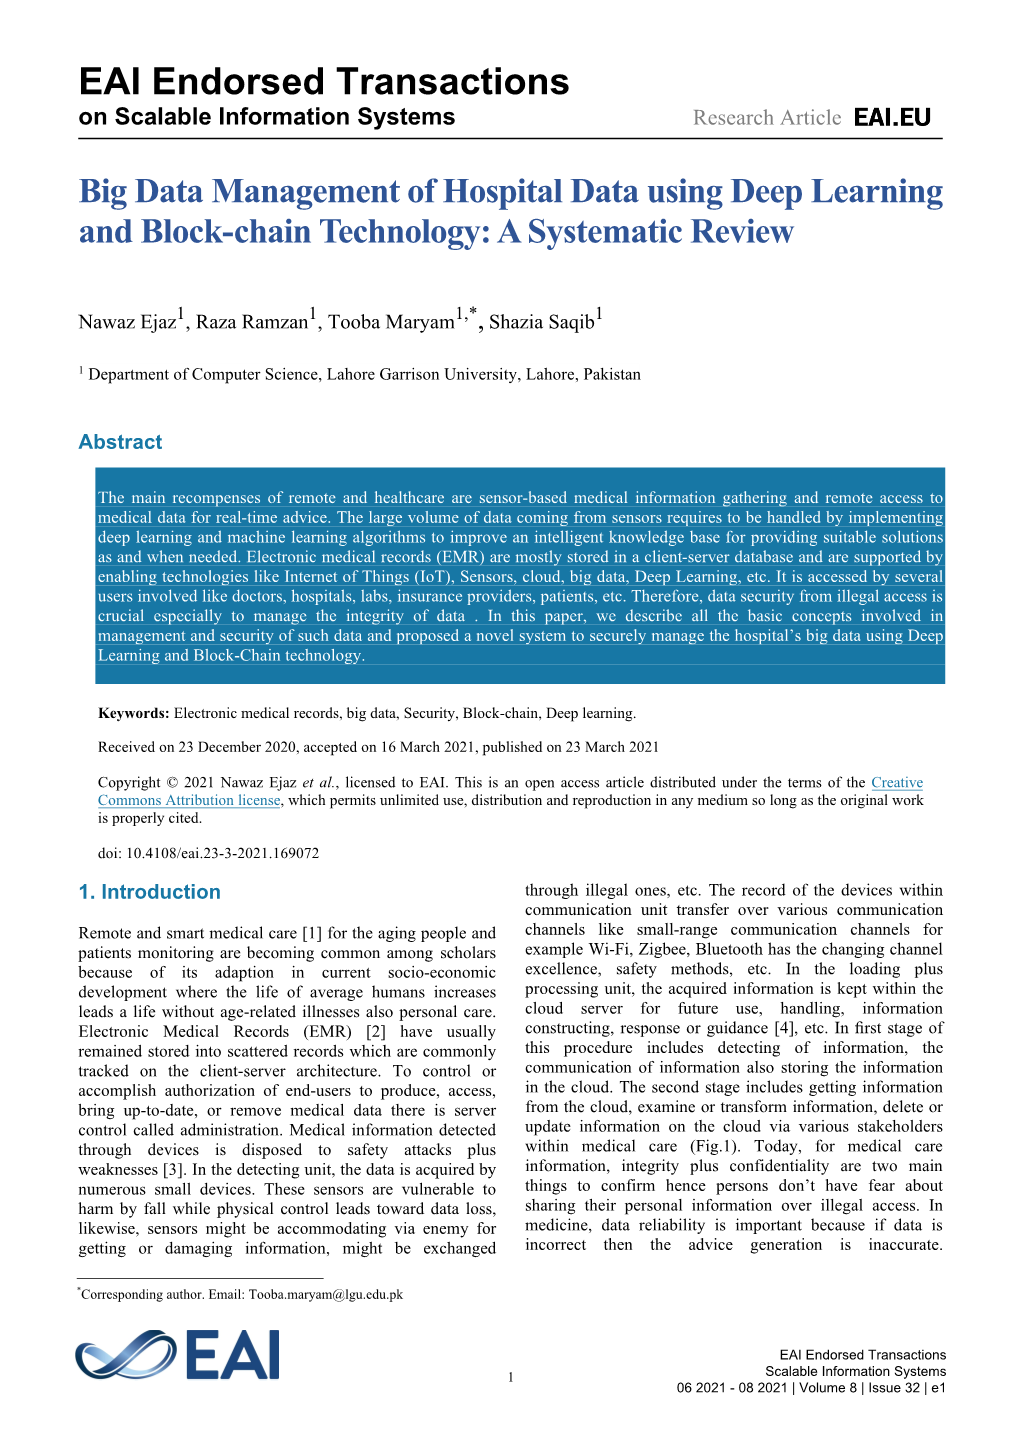 Big Data Management of Hospital Data Using Deep Learning and Block-Chain Technology: a Systematic Review